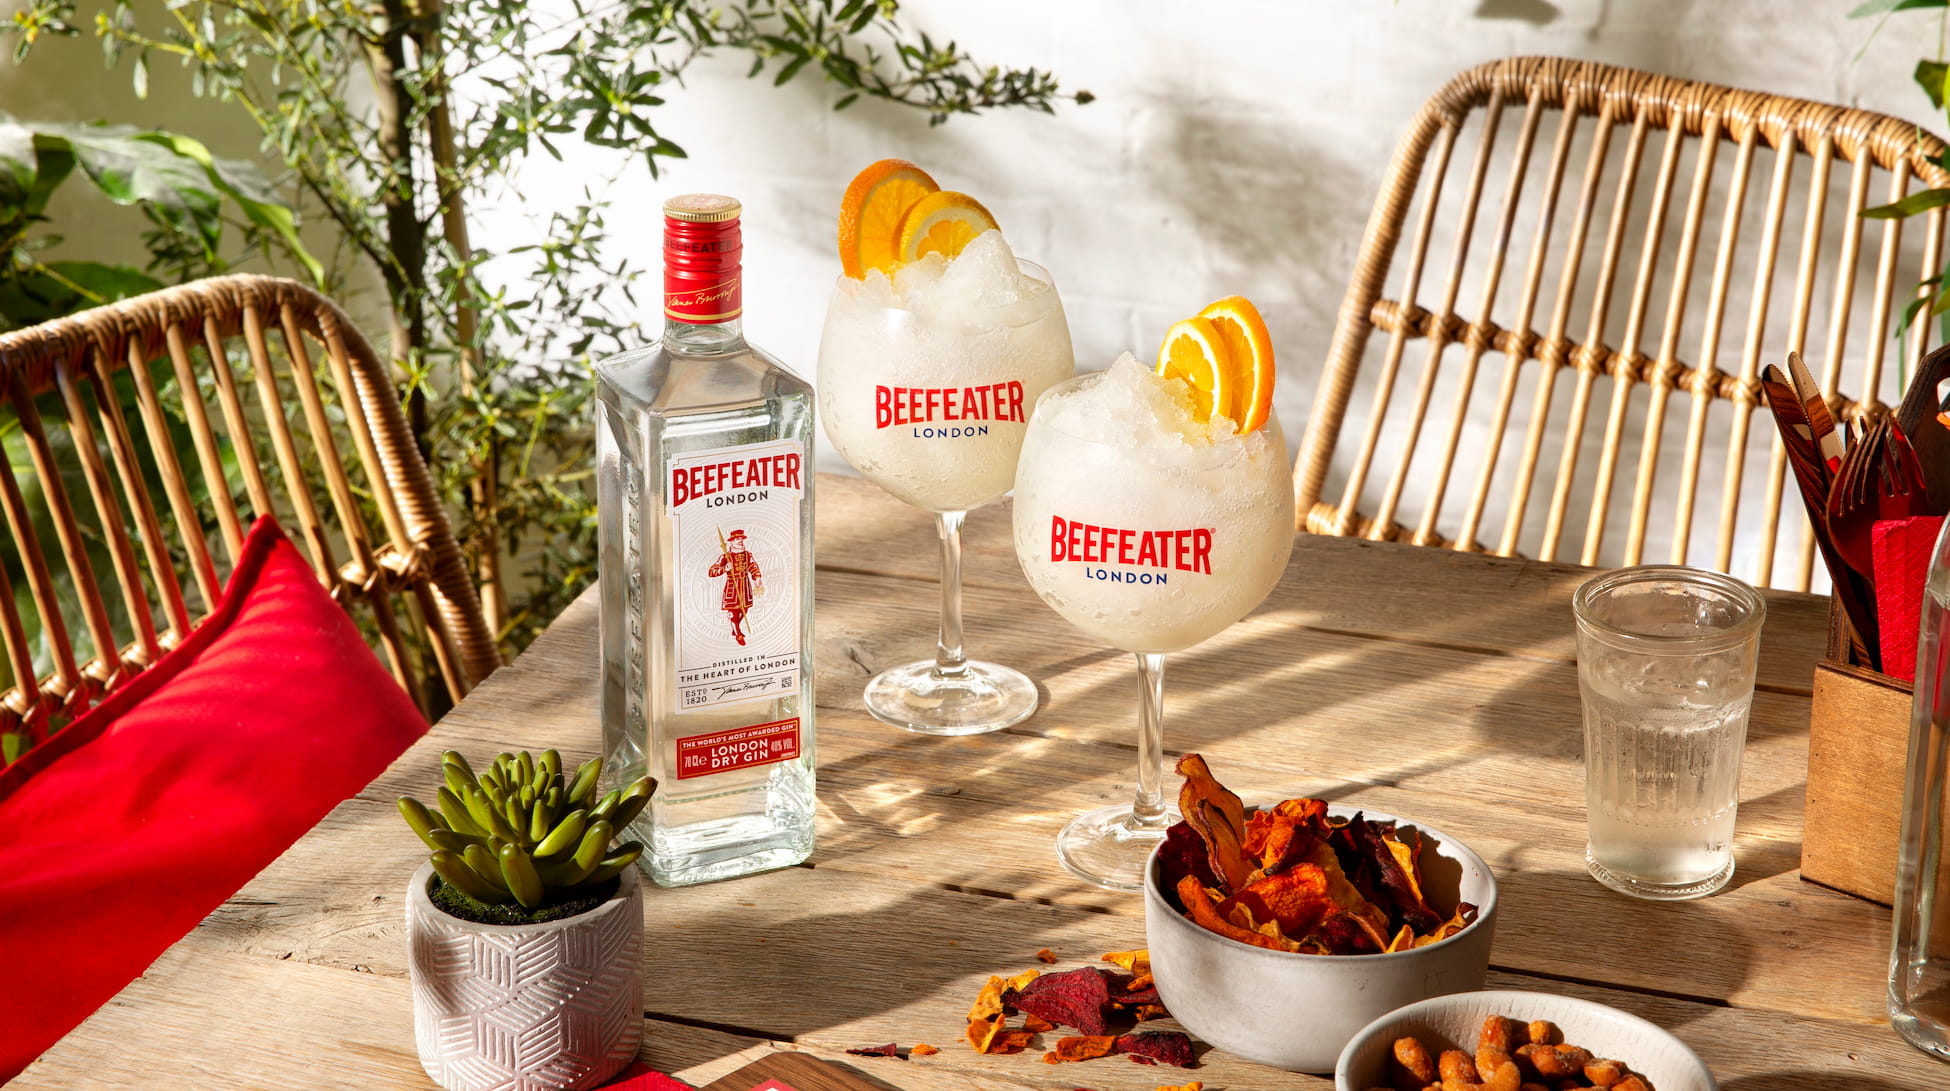 Frozen Gin and Tonic - Ginita cocktail recipe - Beefeater Gin